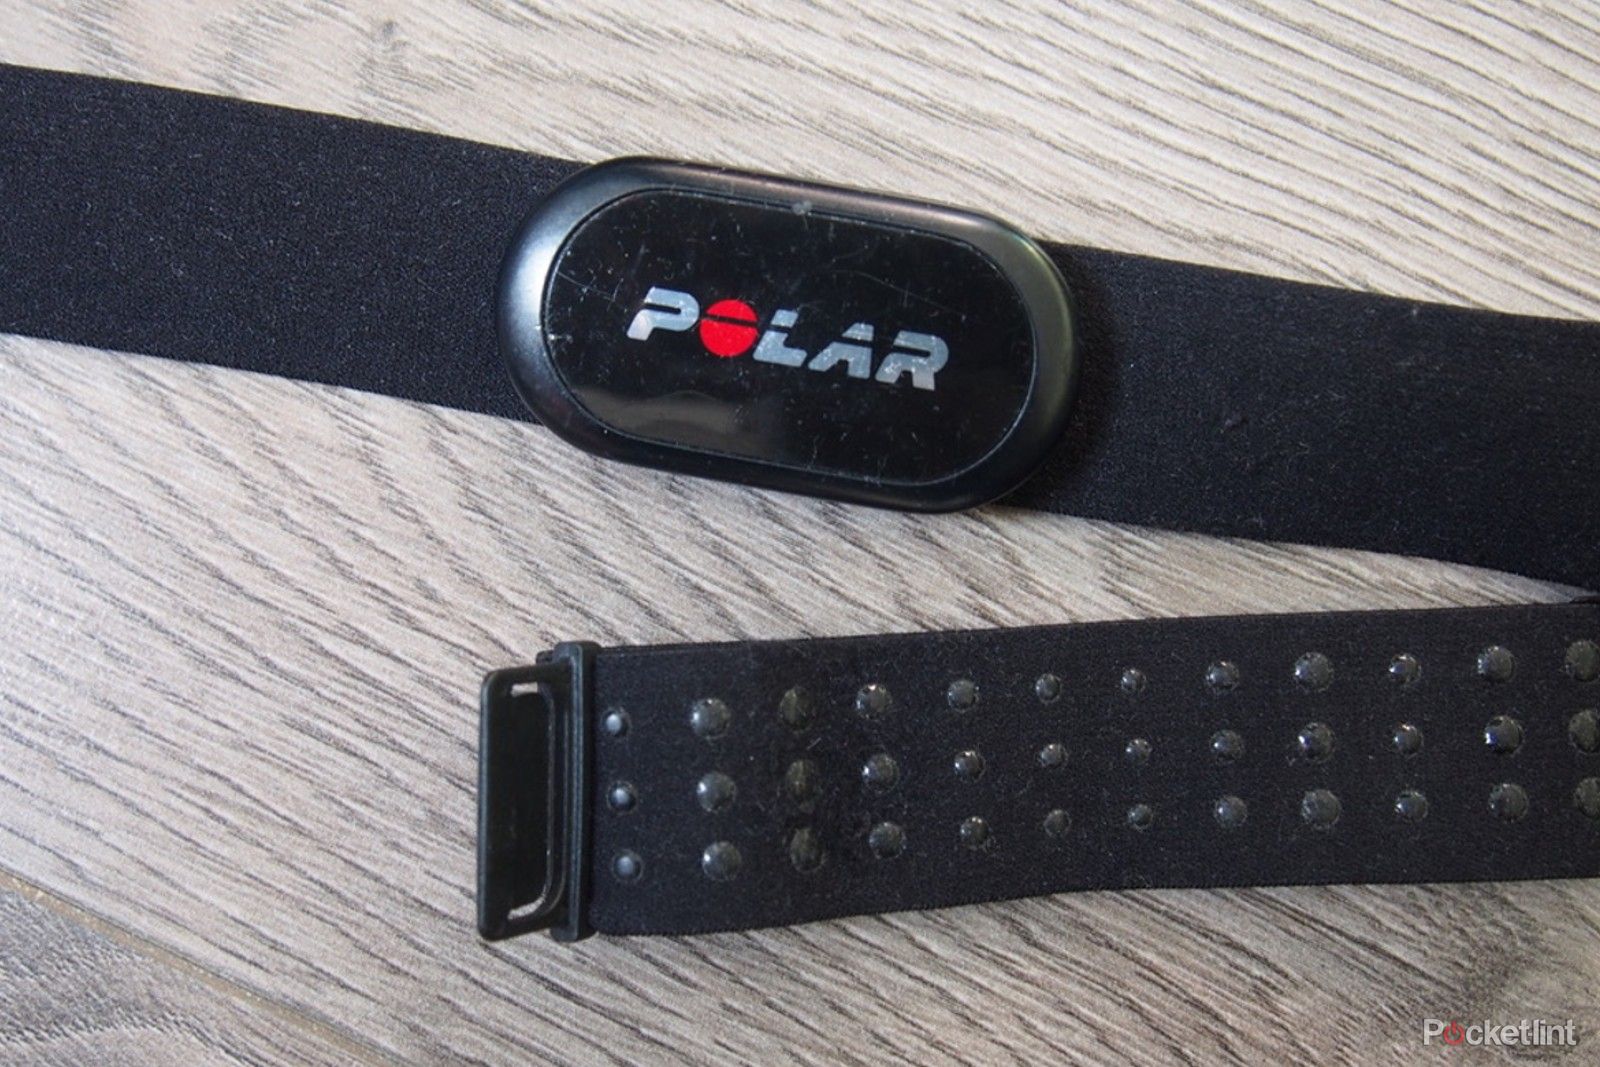 Polar H10 vs. Garmin HRM Pro: Which heart rate monitor is best